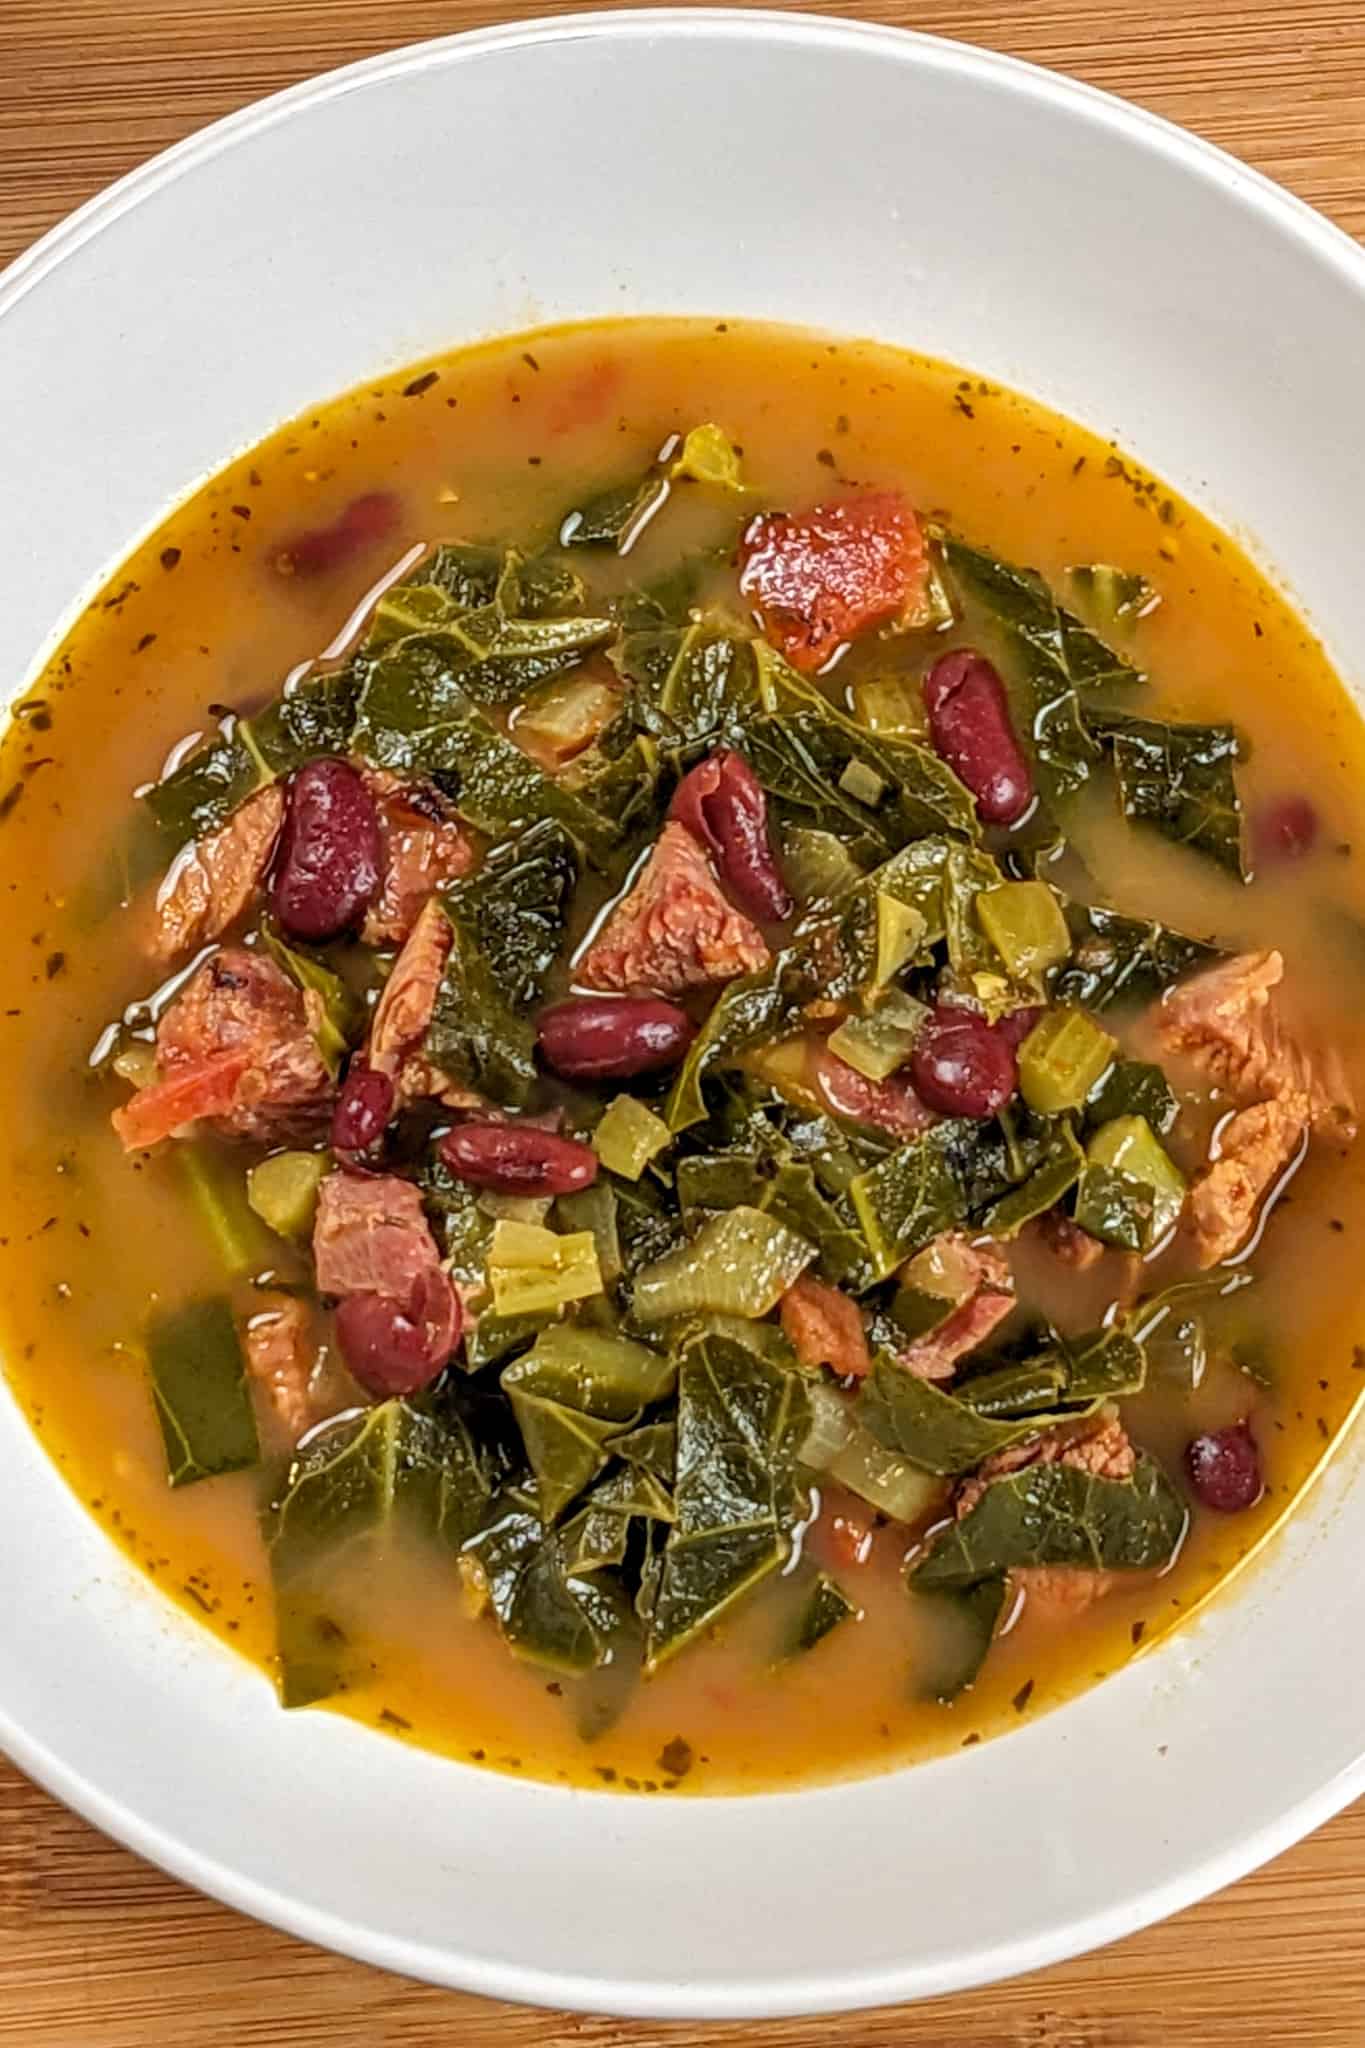 Top view of the Scotch Bonnet Smoked Turkey Collard Greens Beans Soup in a wide rim bowl